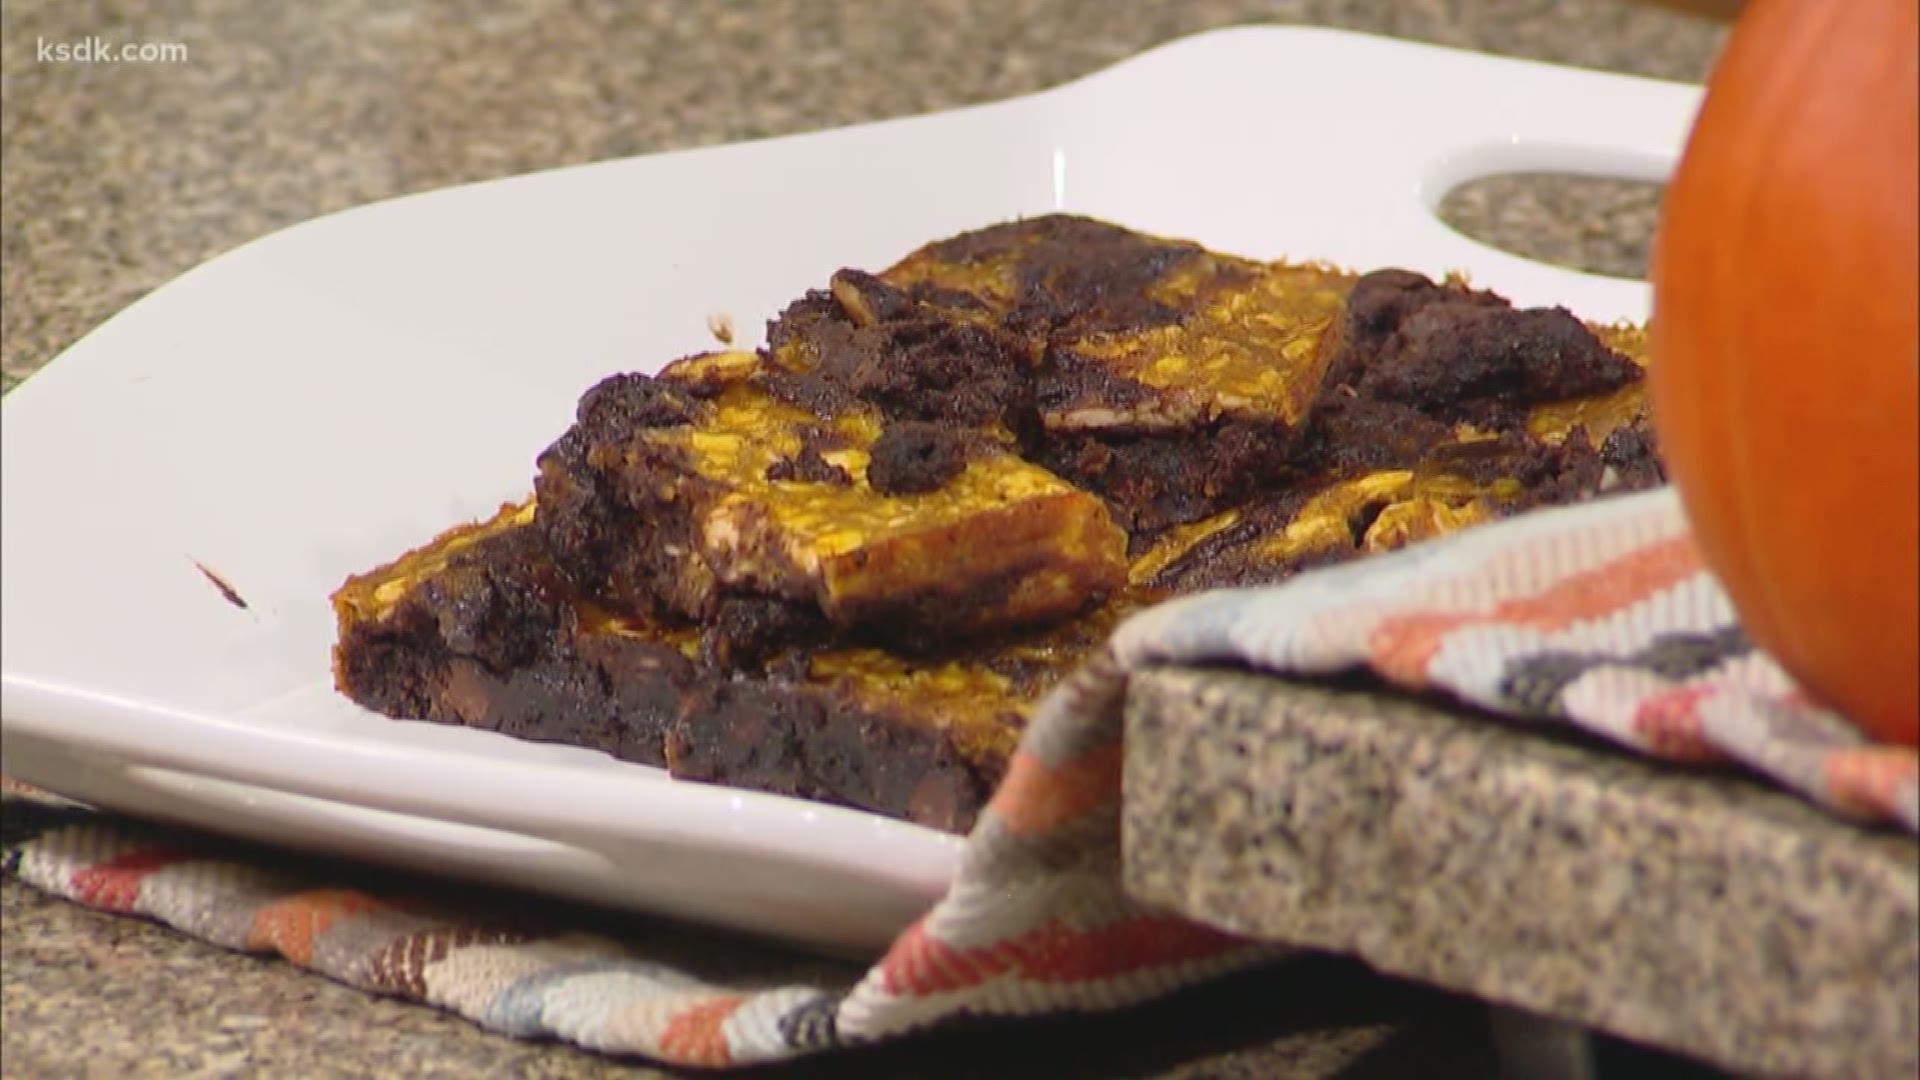 Hayley Sohn of Basically It Meals is gearing up for fall weather with these Gluten Free Pumpkin Cheesecake Brownies!